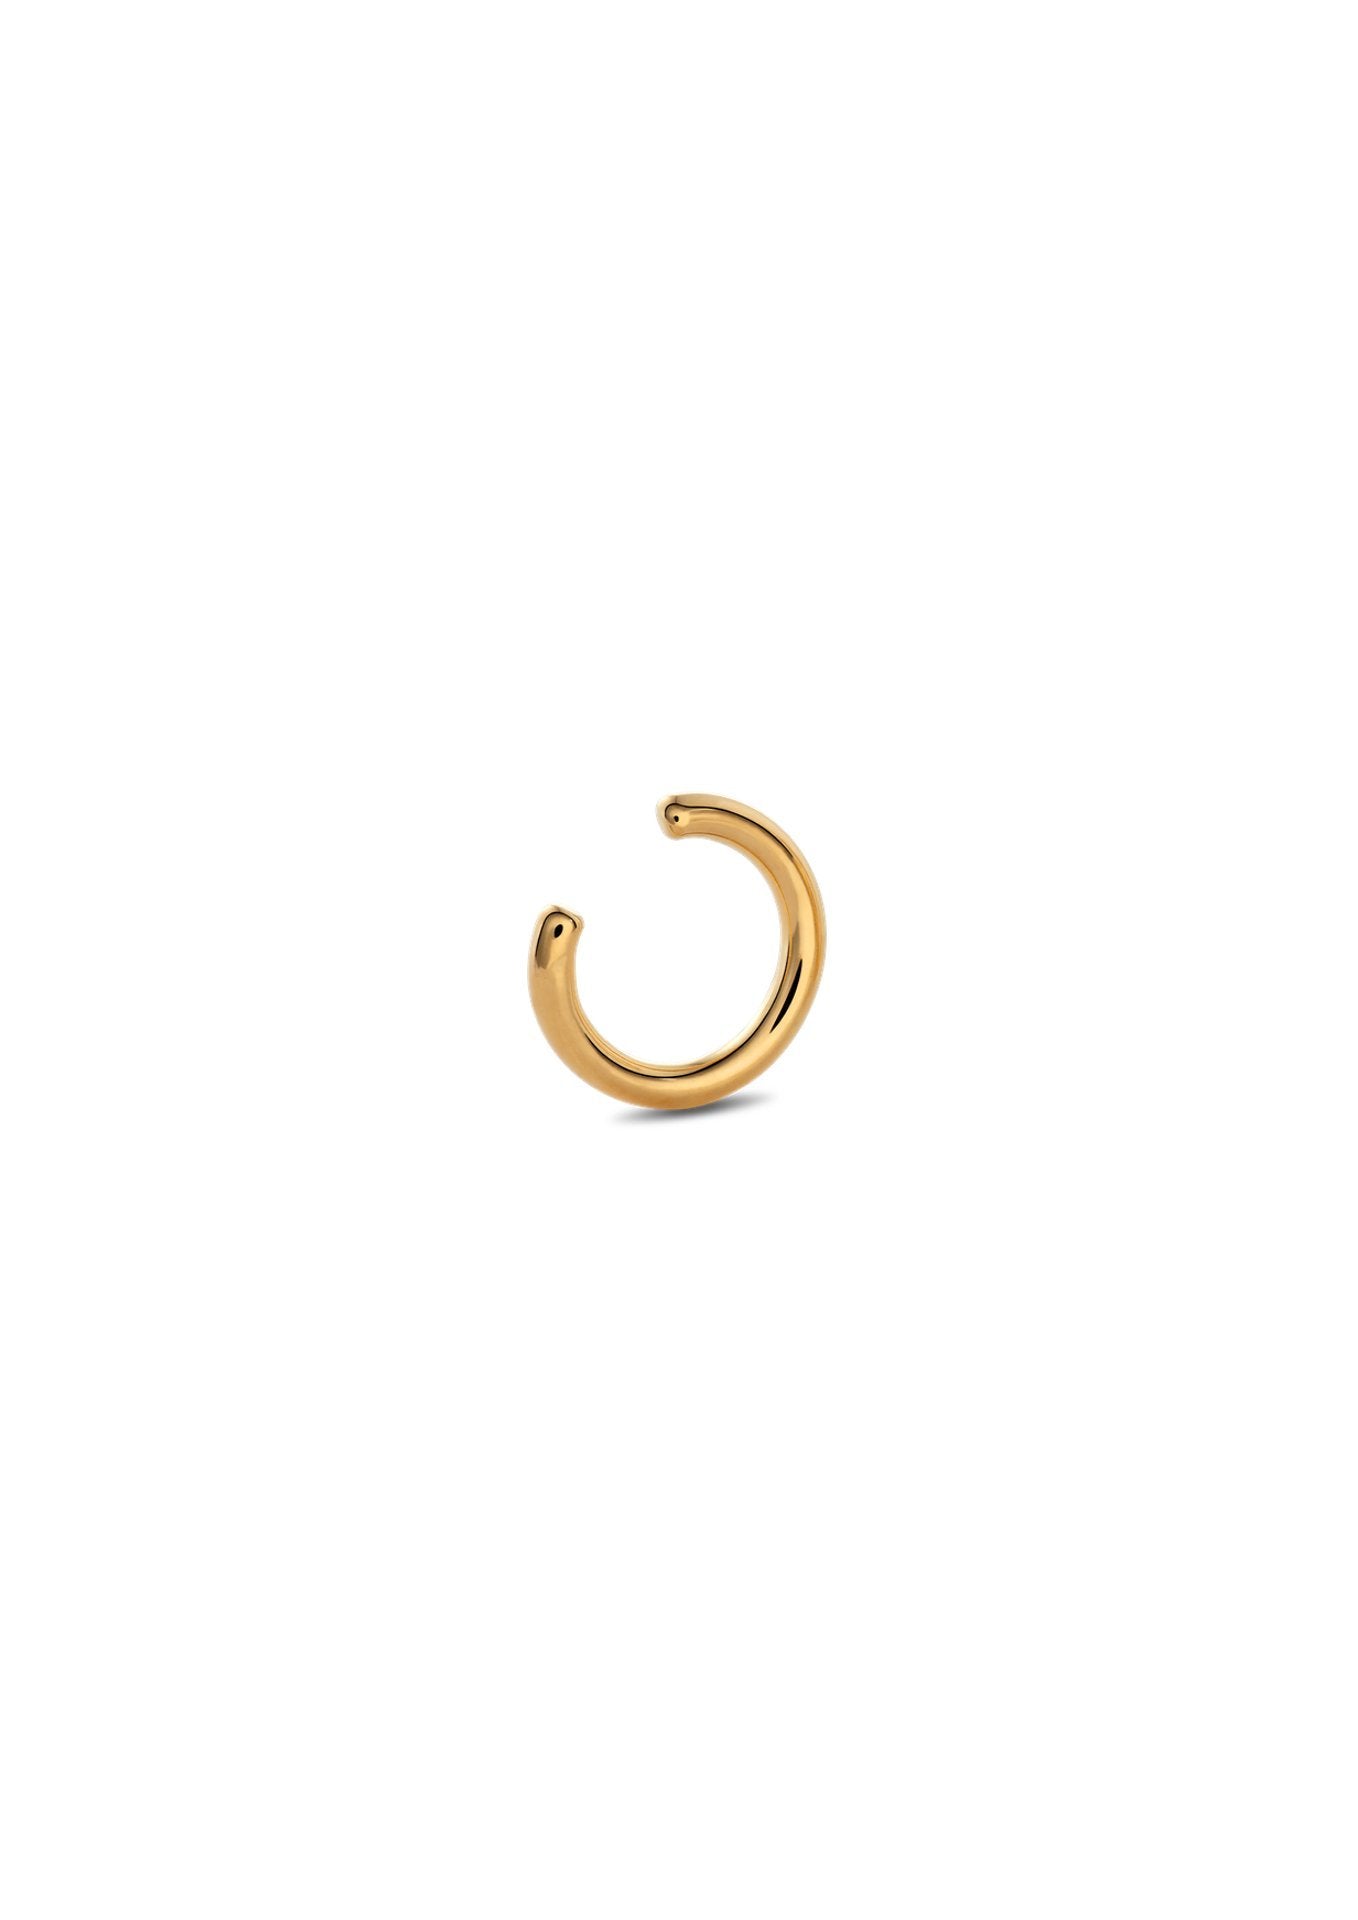 NO MORE accessories Line Ear Cuff in gold plated sterling silver